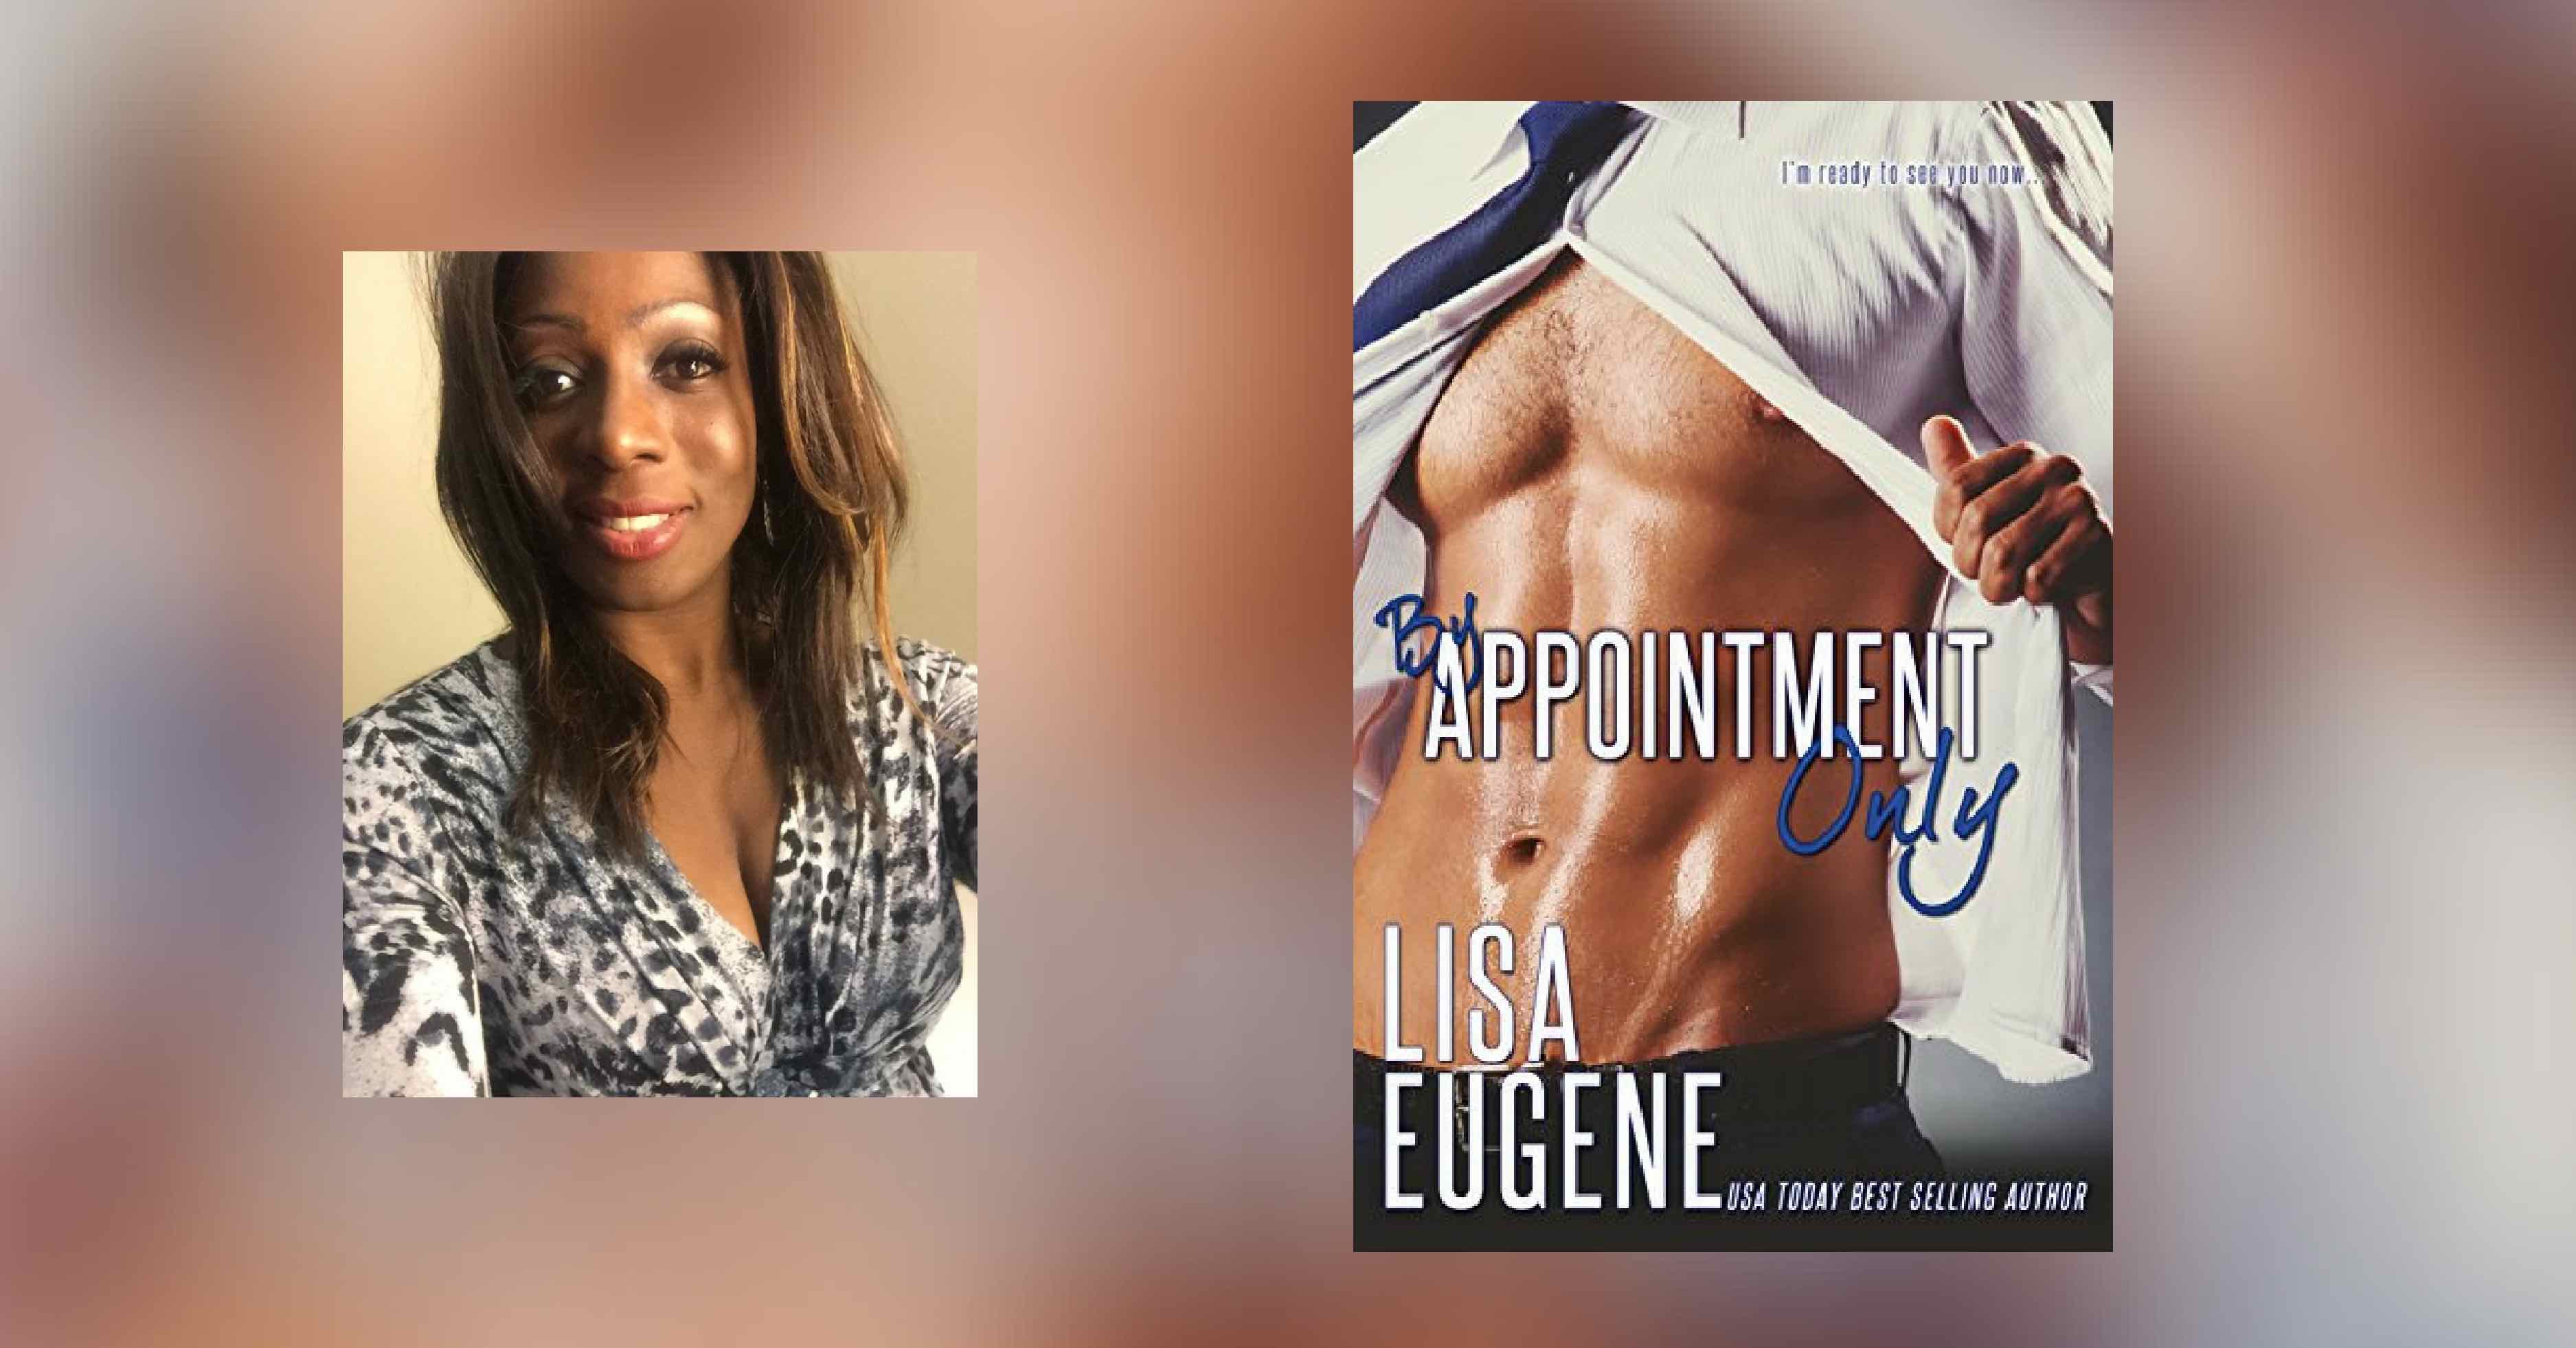 Interview with Lisa Eugene, author of By Appointment Only